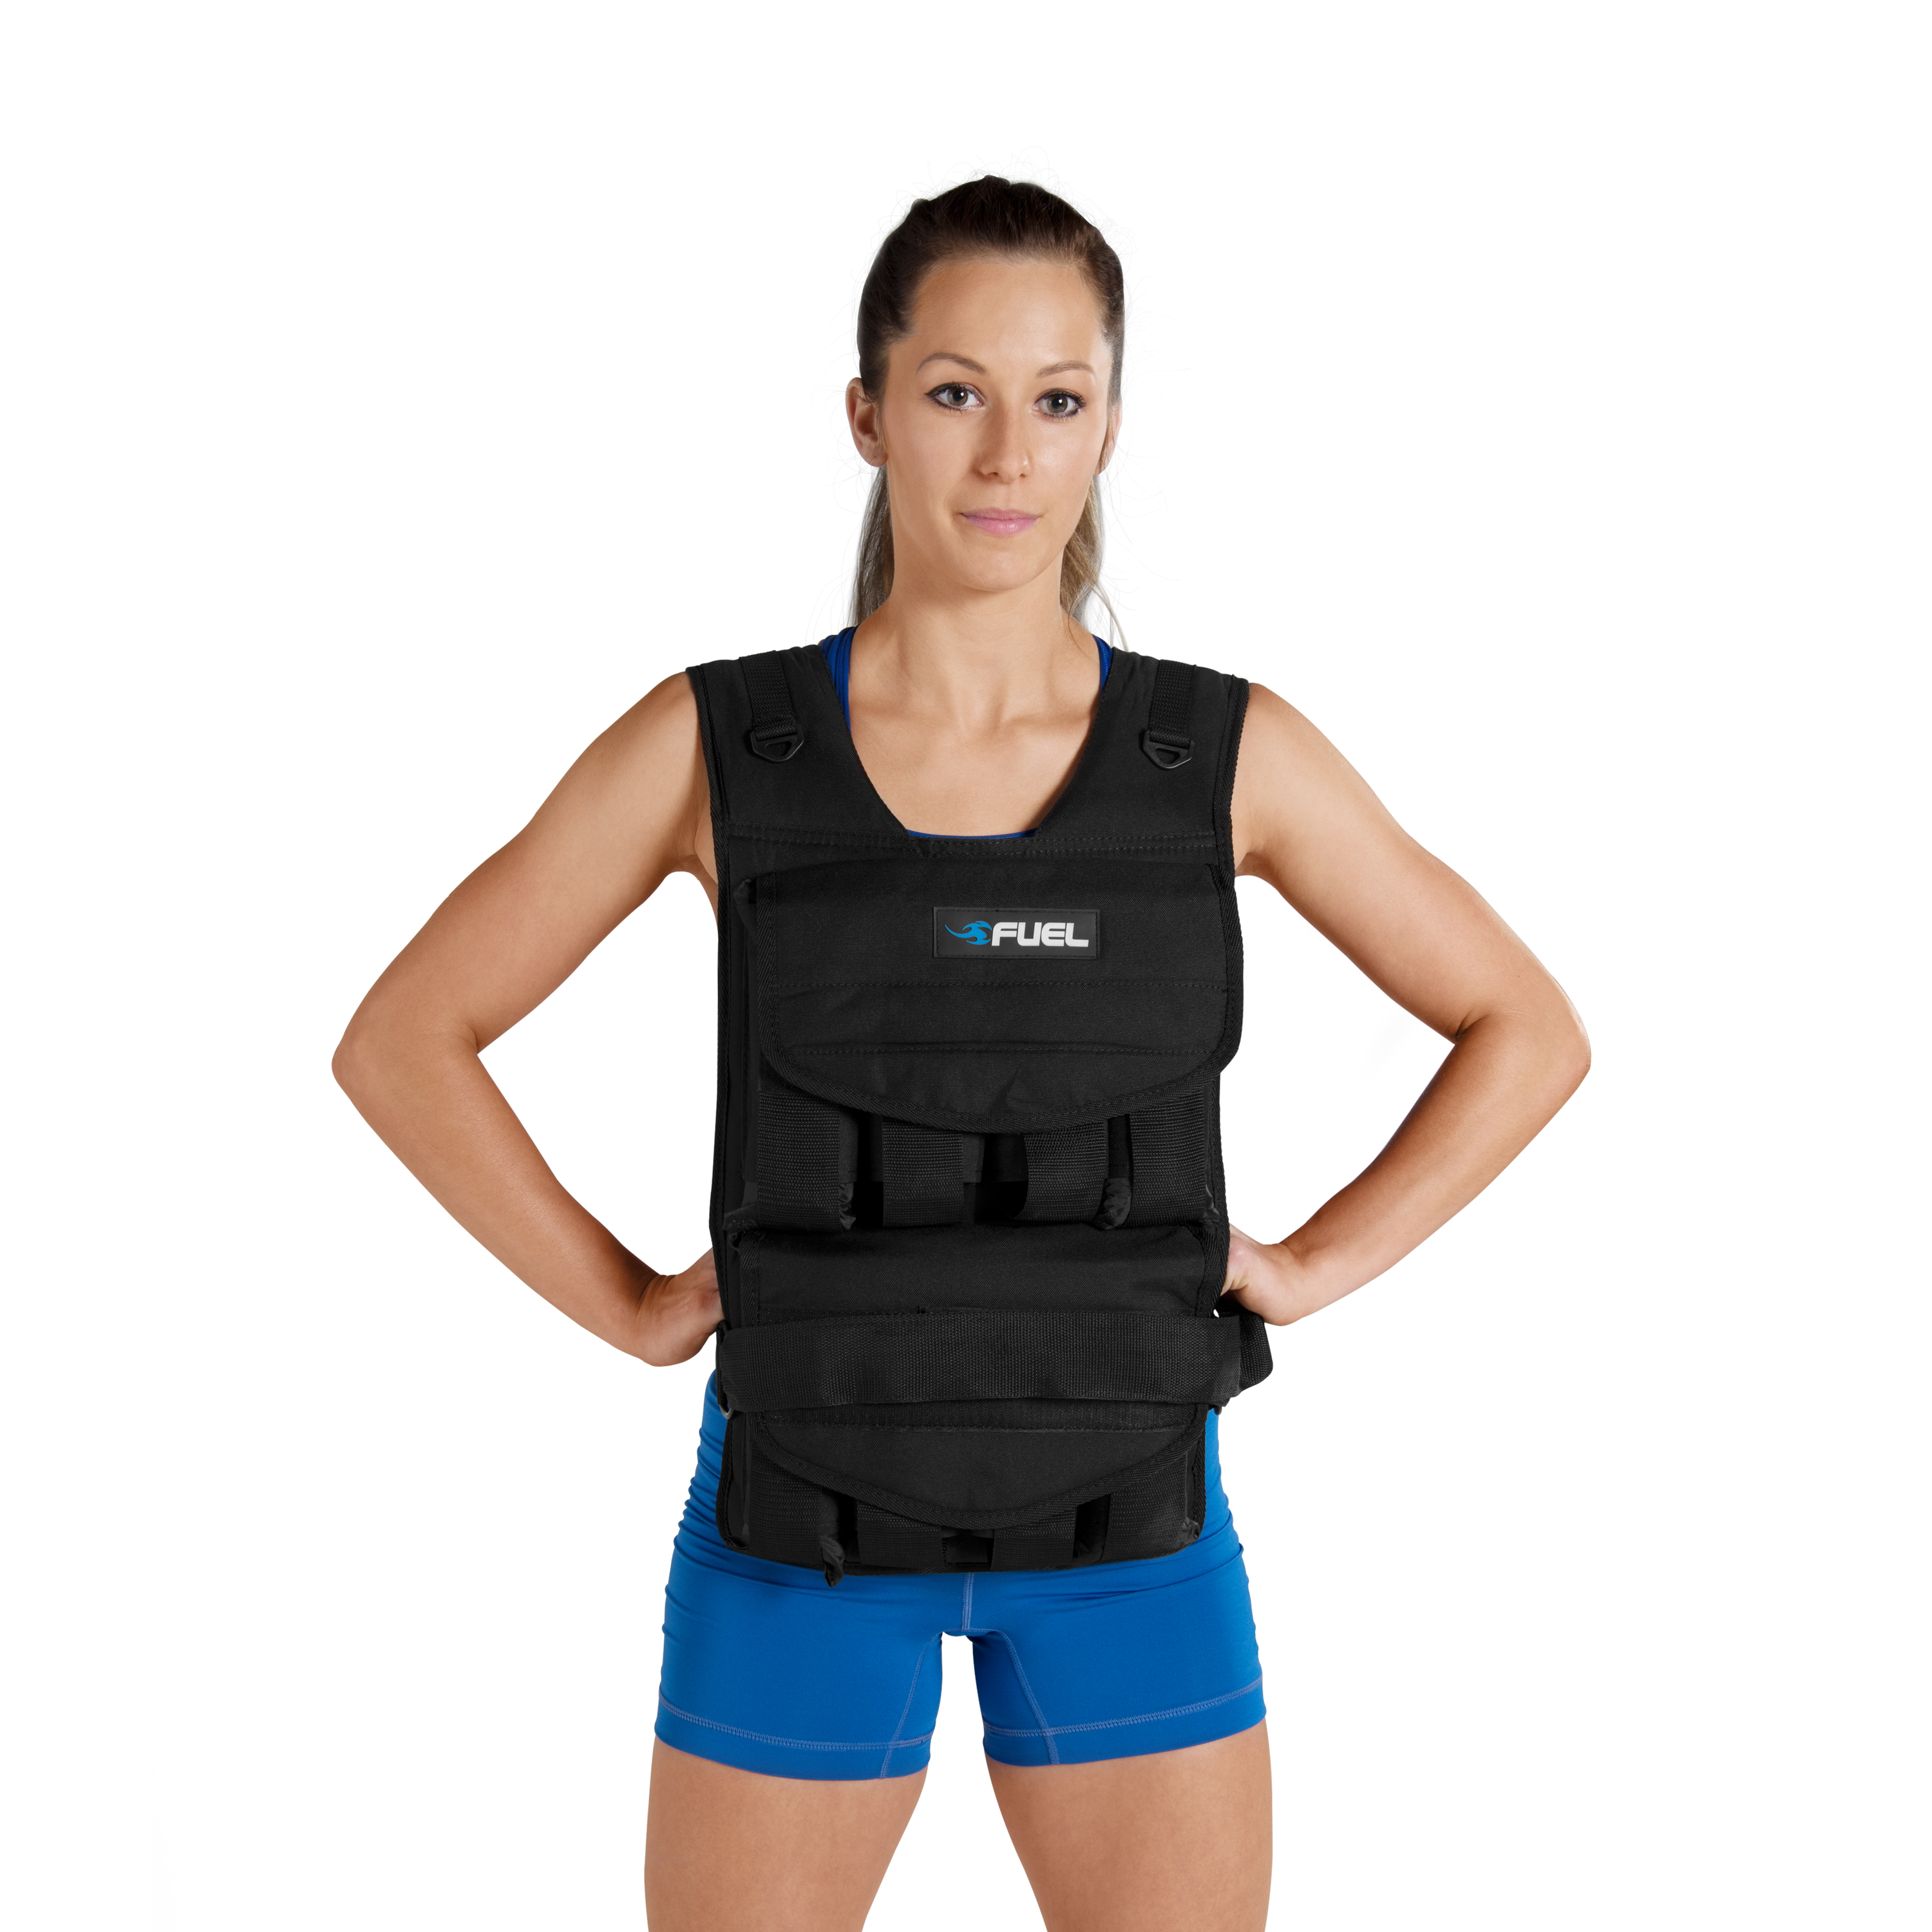 Fuel Pureformance Adjustable Weighted Fitness Vest, 40 Lb. - image 4 of 4